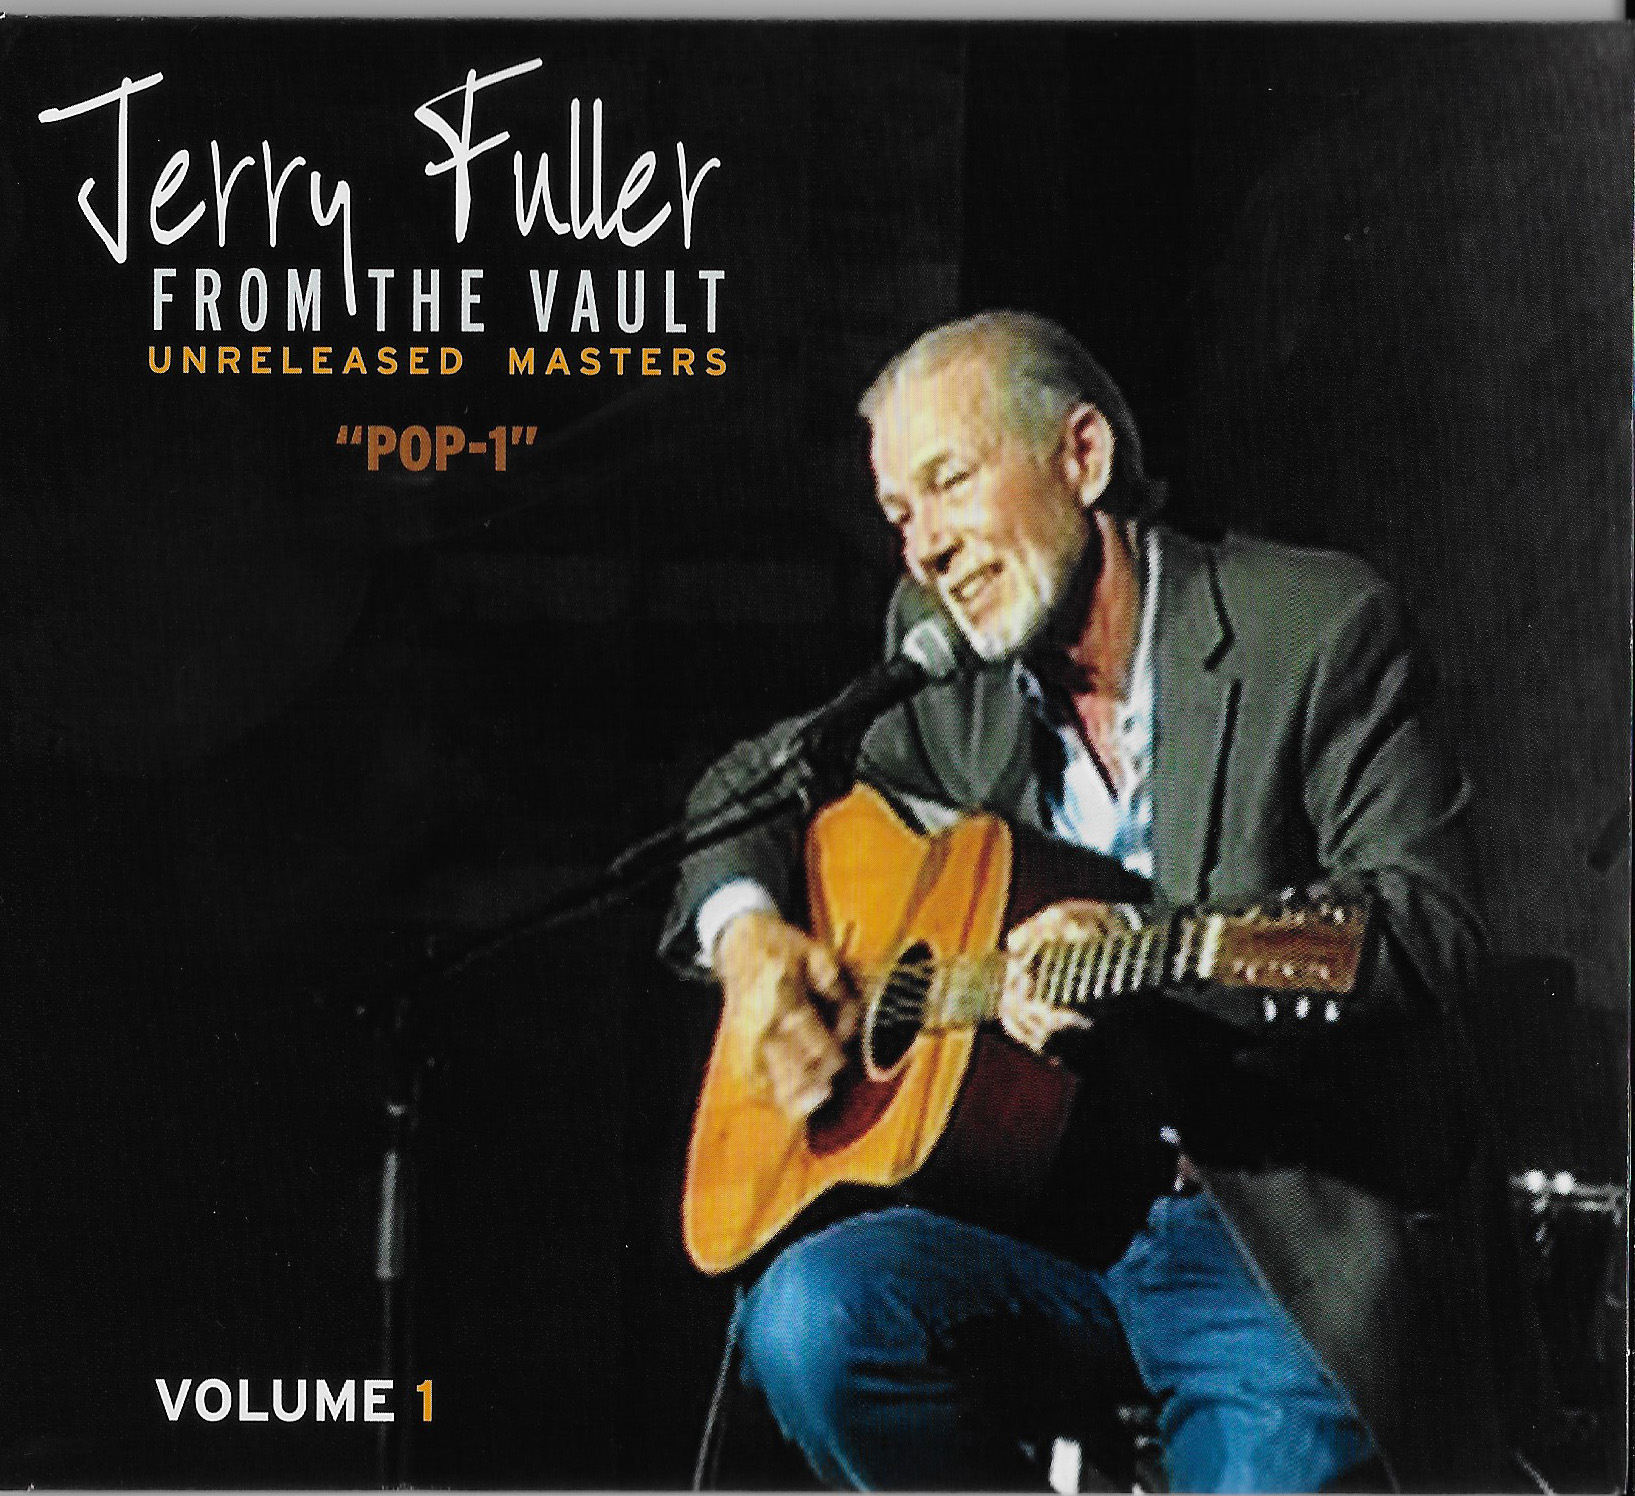 JERRY FULLER FROM THE VAULT - VOLUME 1